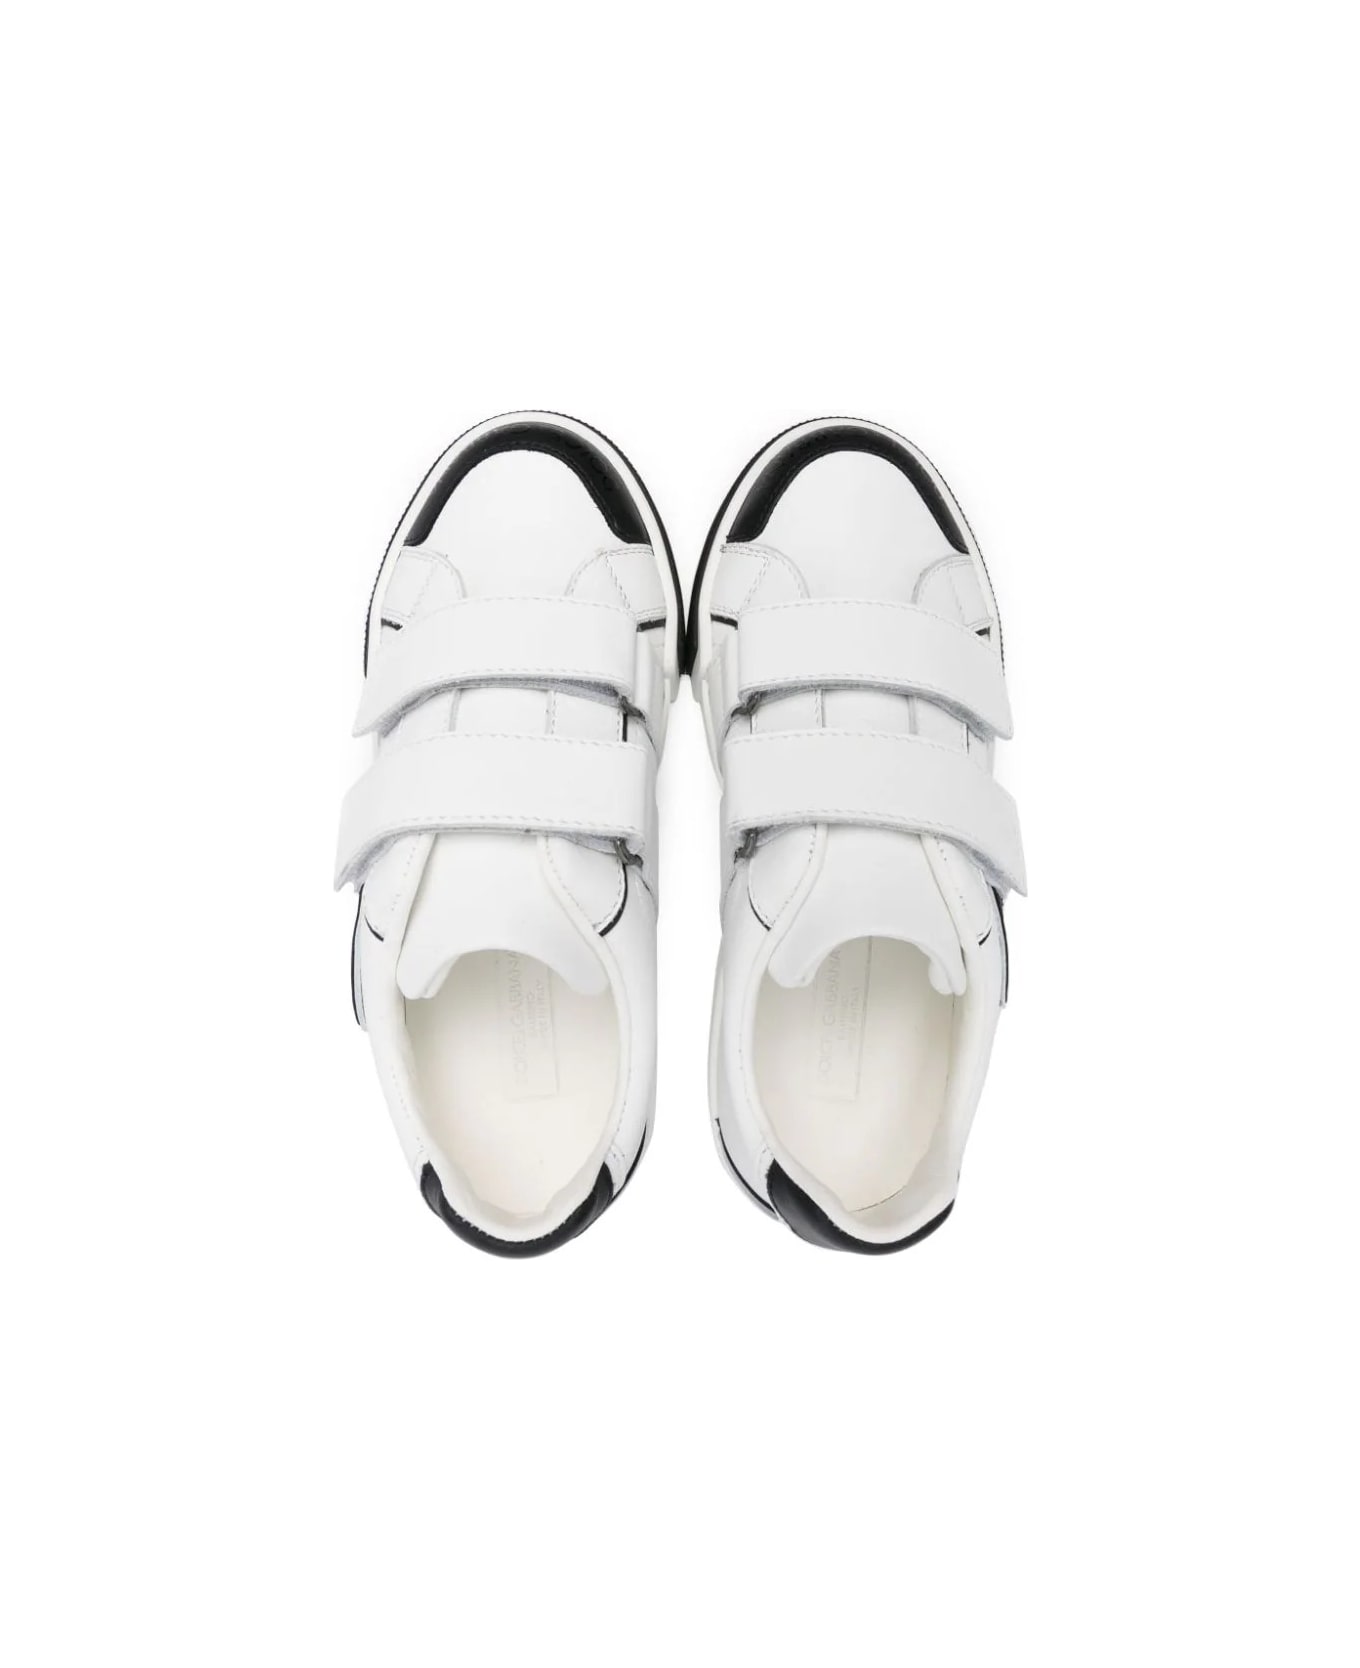 Dolce & Gabbana White And Black Sneakers With Dg Logo - Bianco